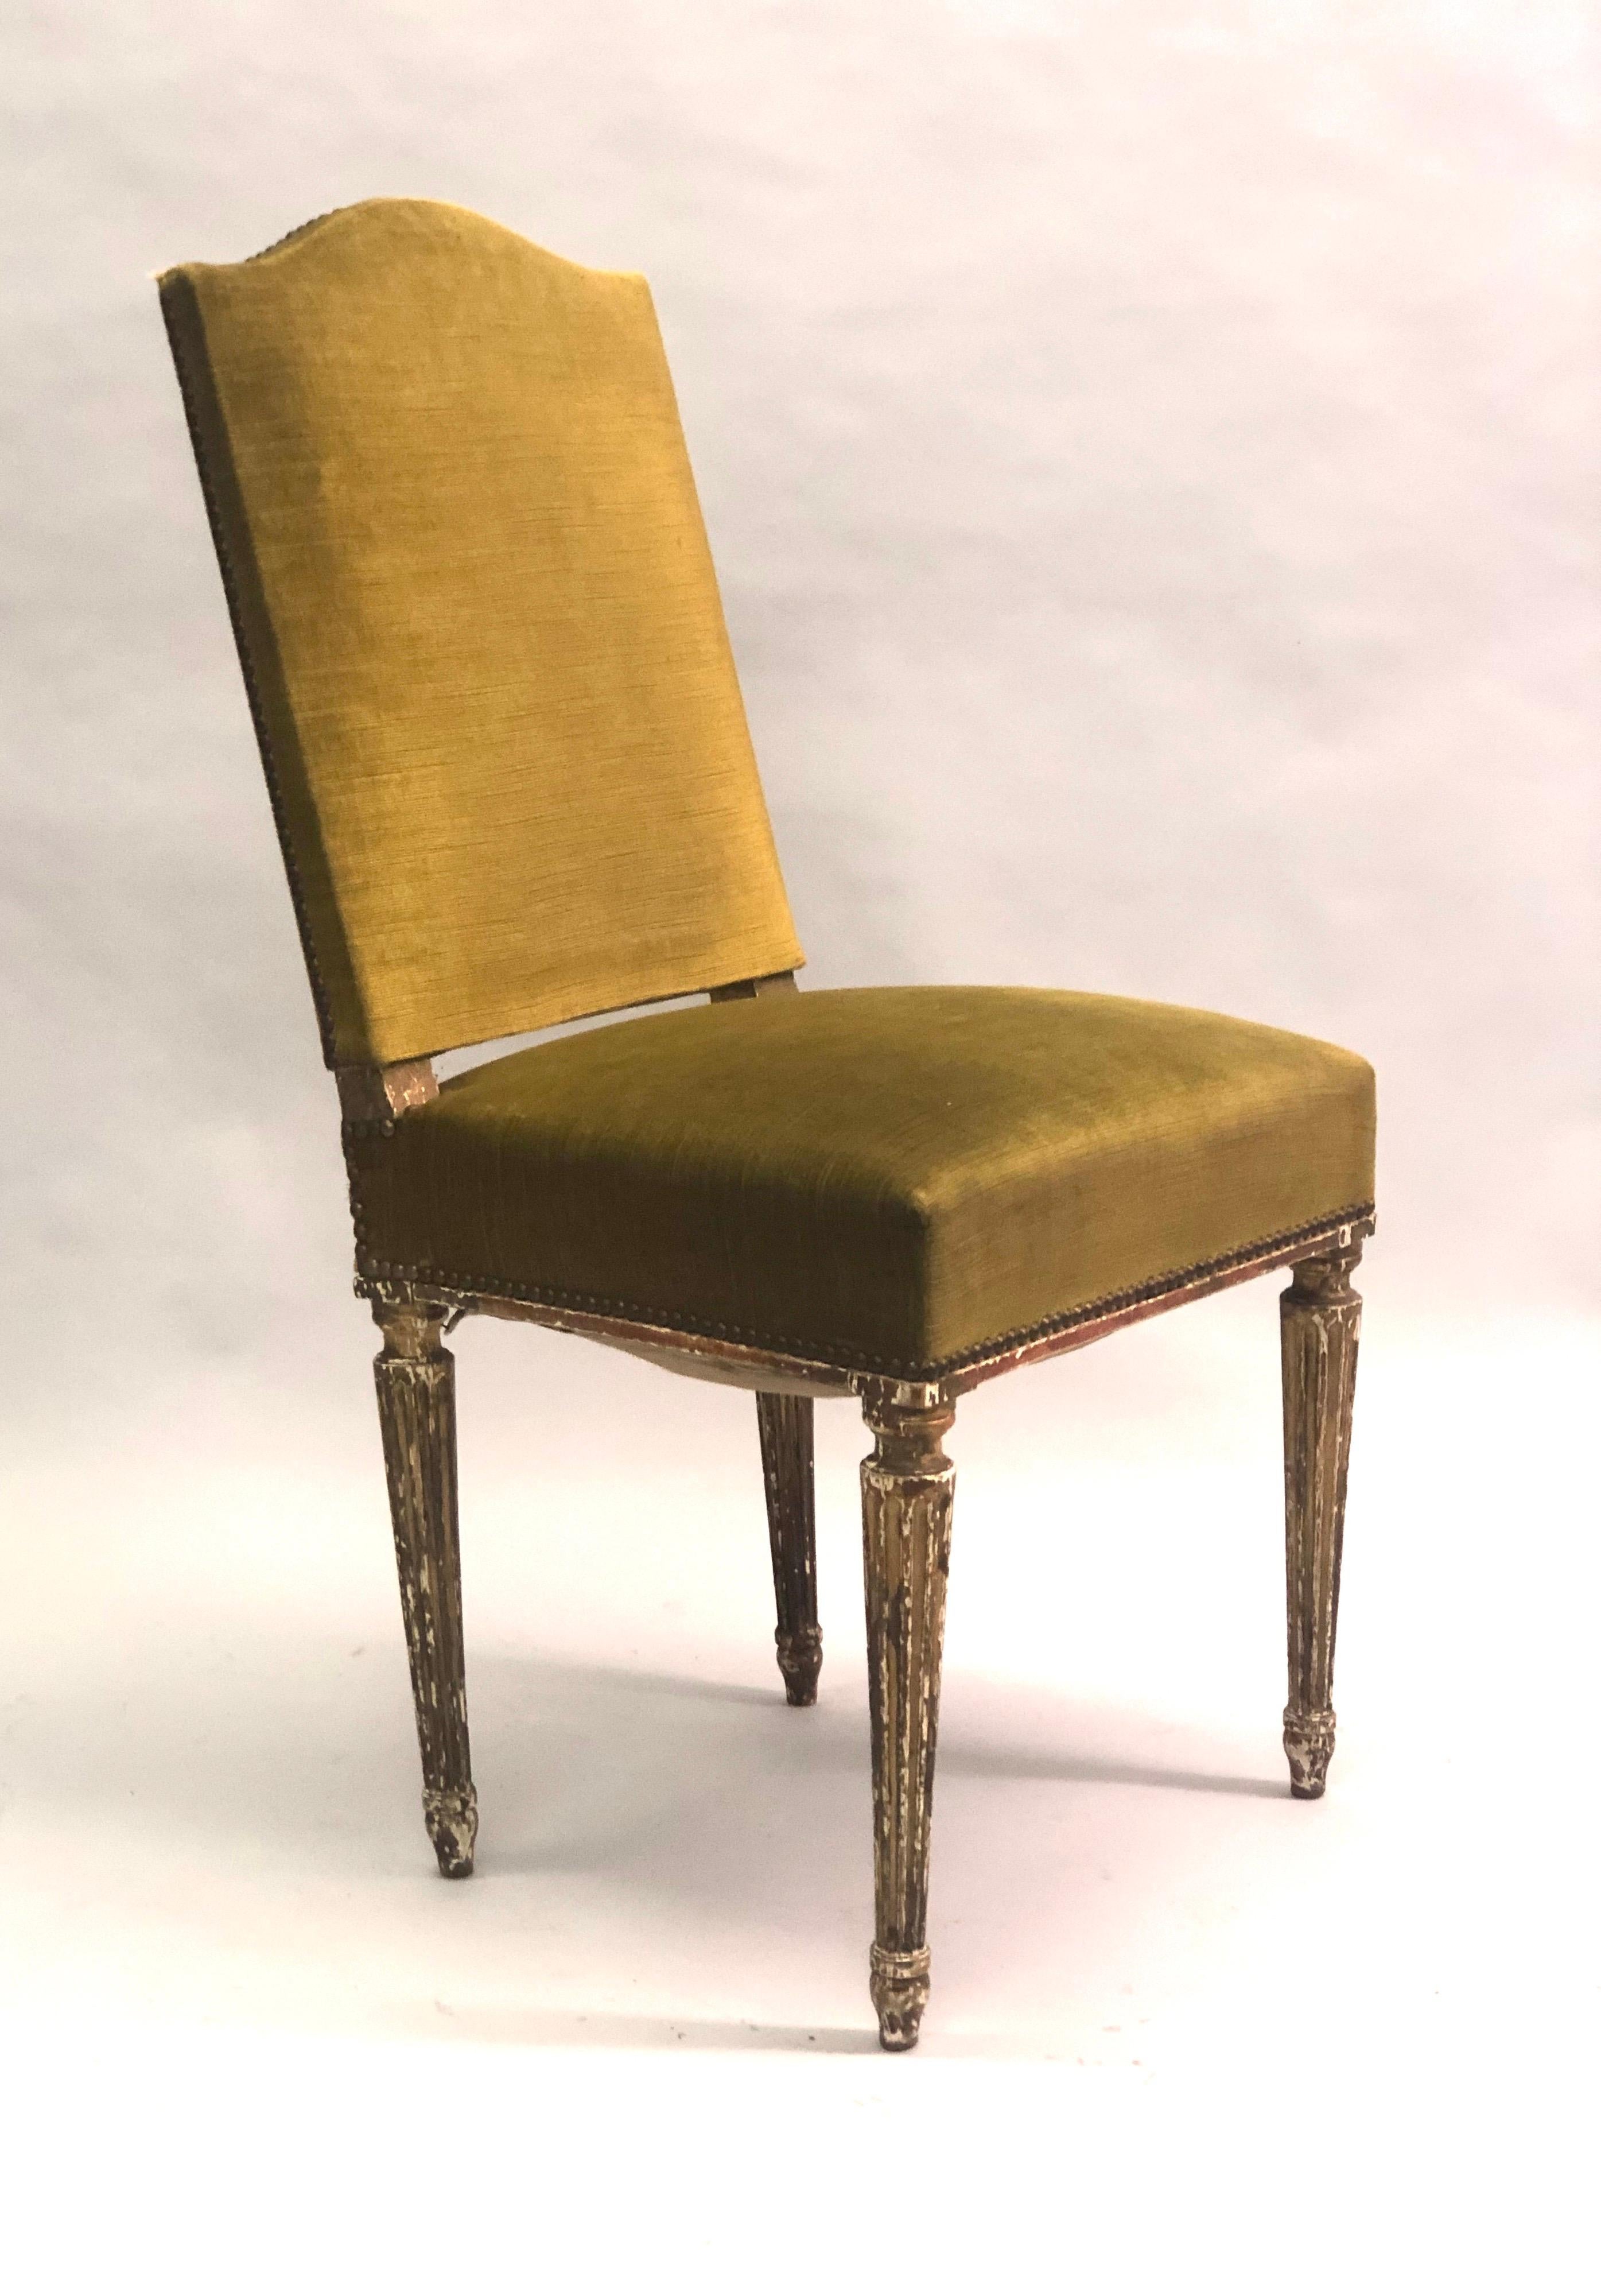 Hand-Carved 4 French Modern Neoclassical Dining Chairs Attributed to Maison Jansen, 1940